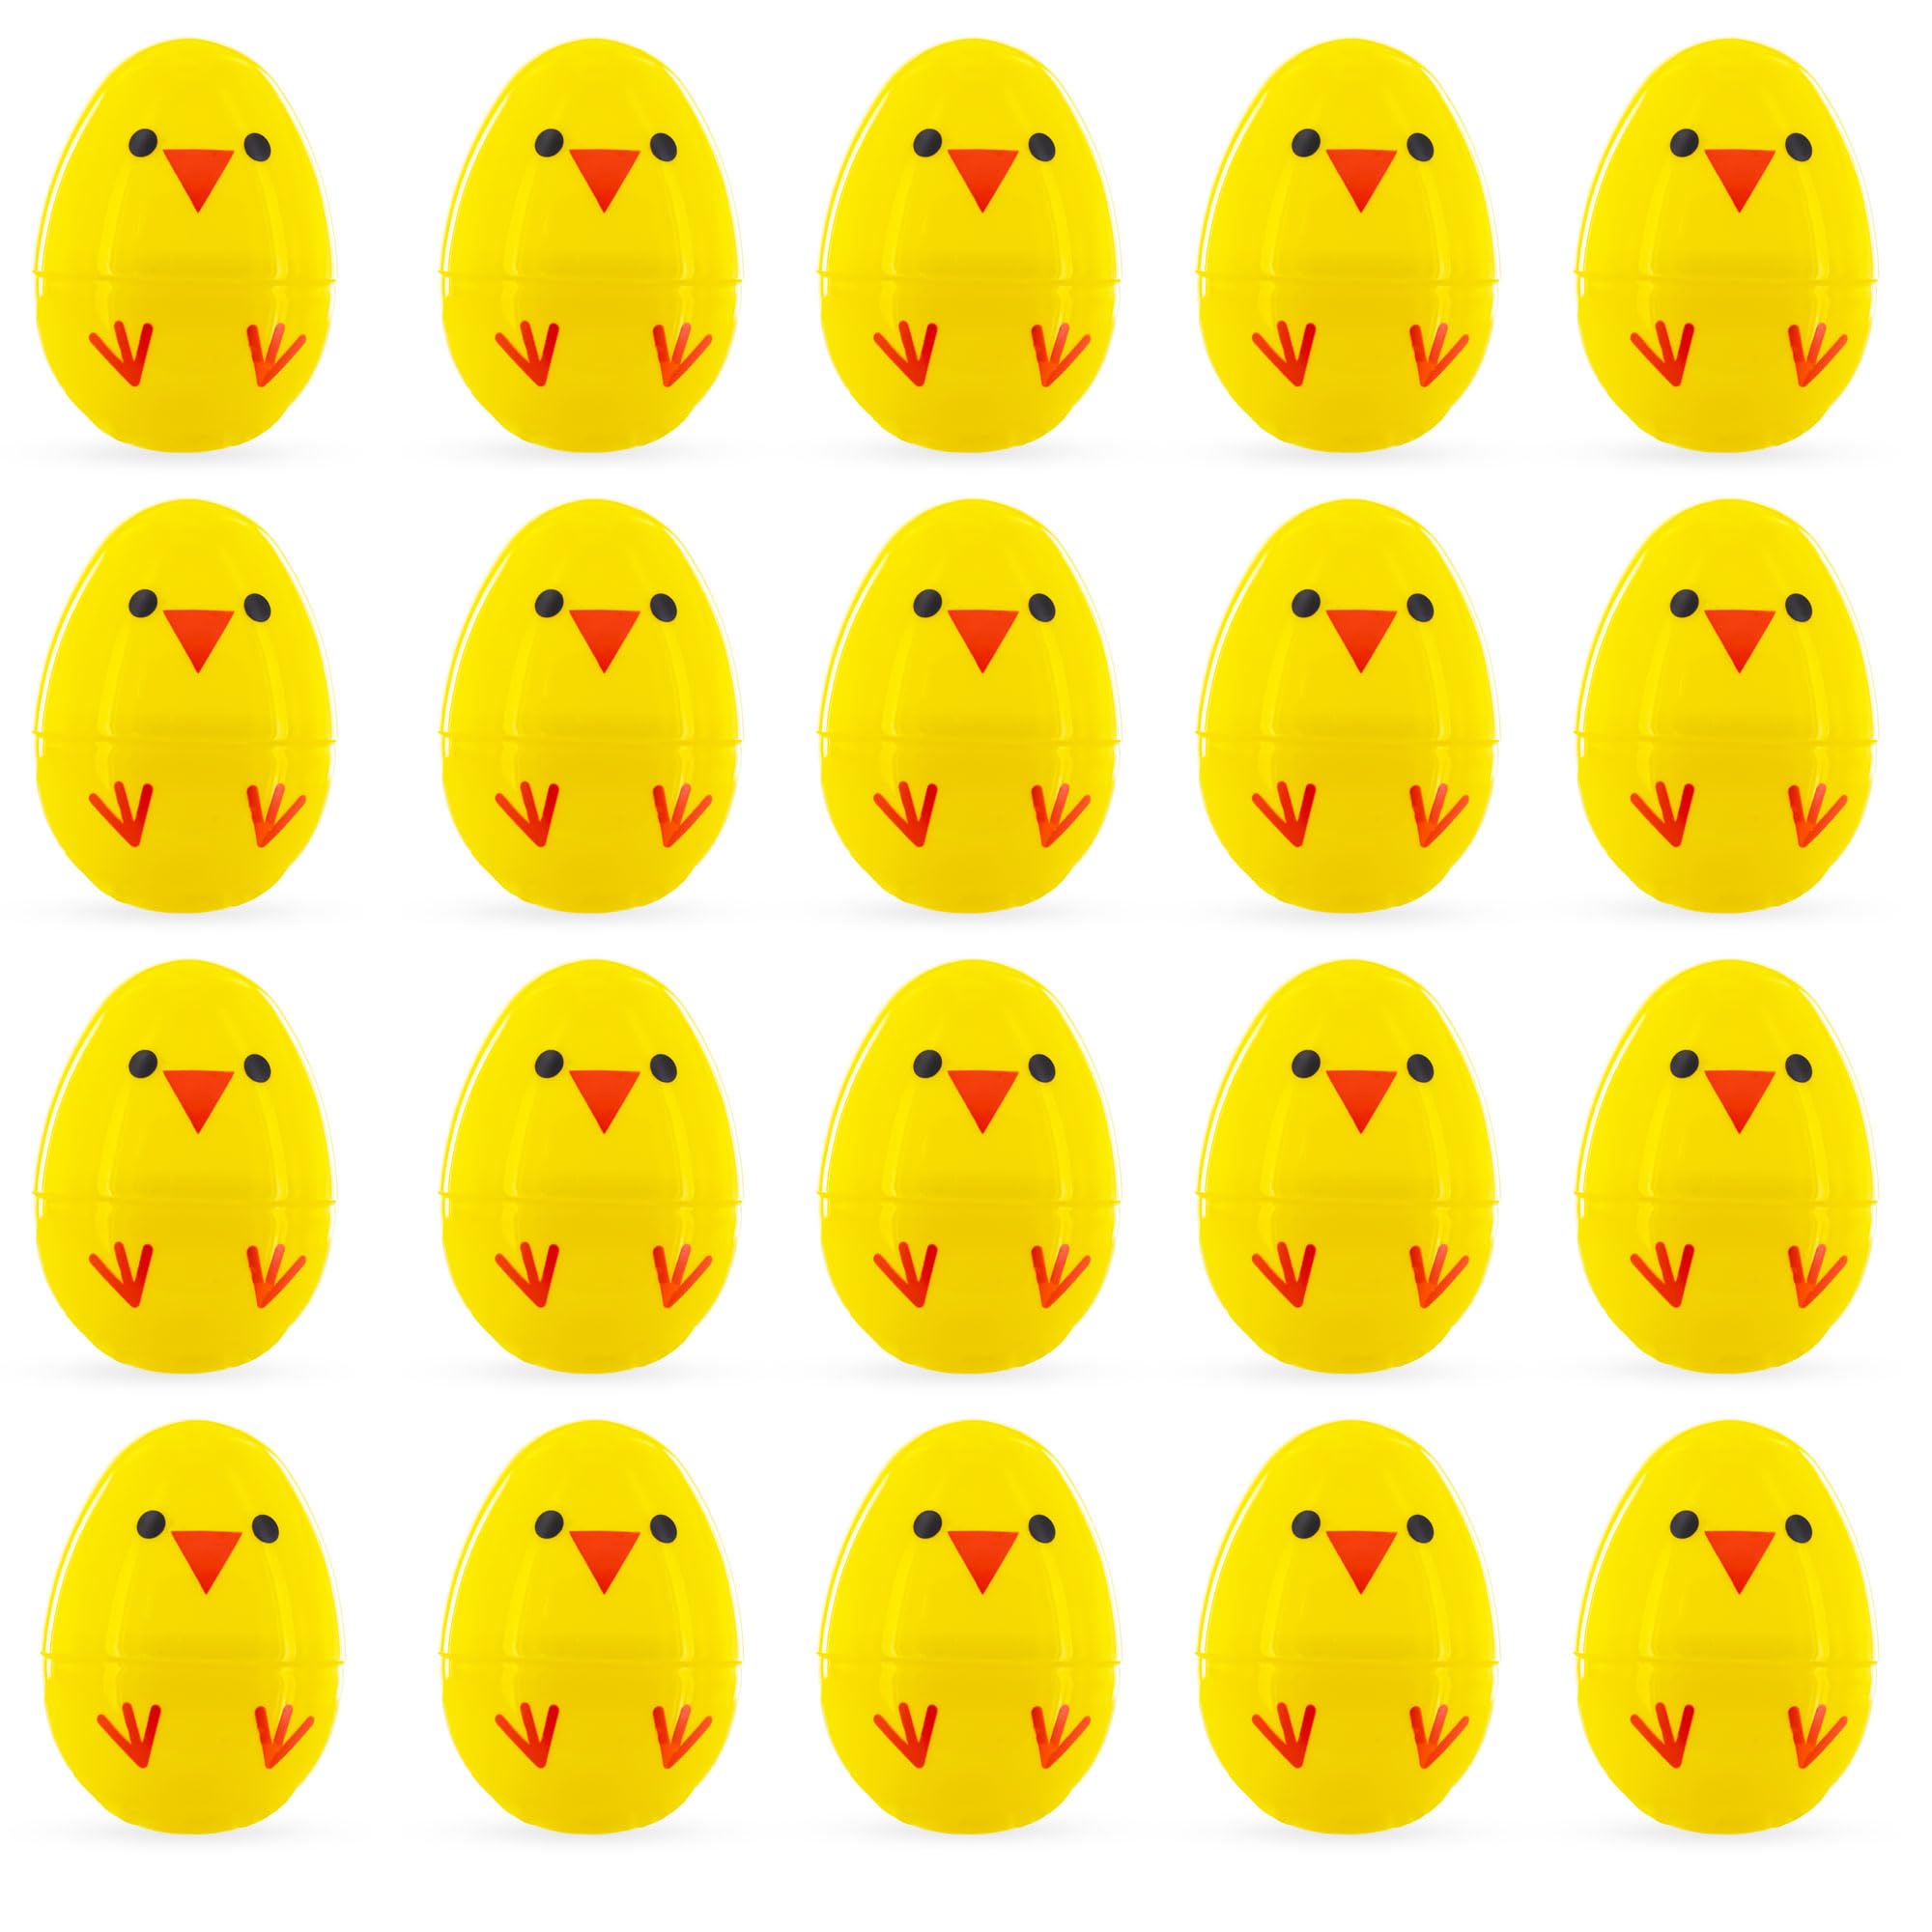 Cheerful Chicks: Set of 20 Chicks Fillable Plastic Easter Eggs 2.25 Inches